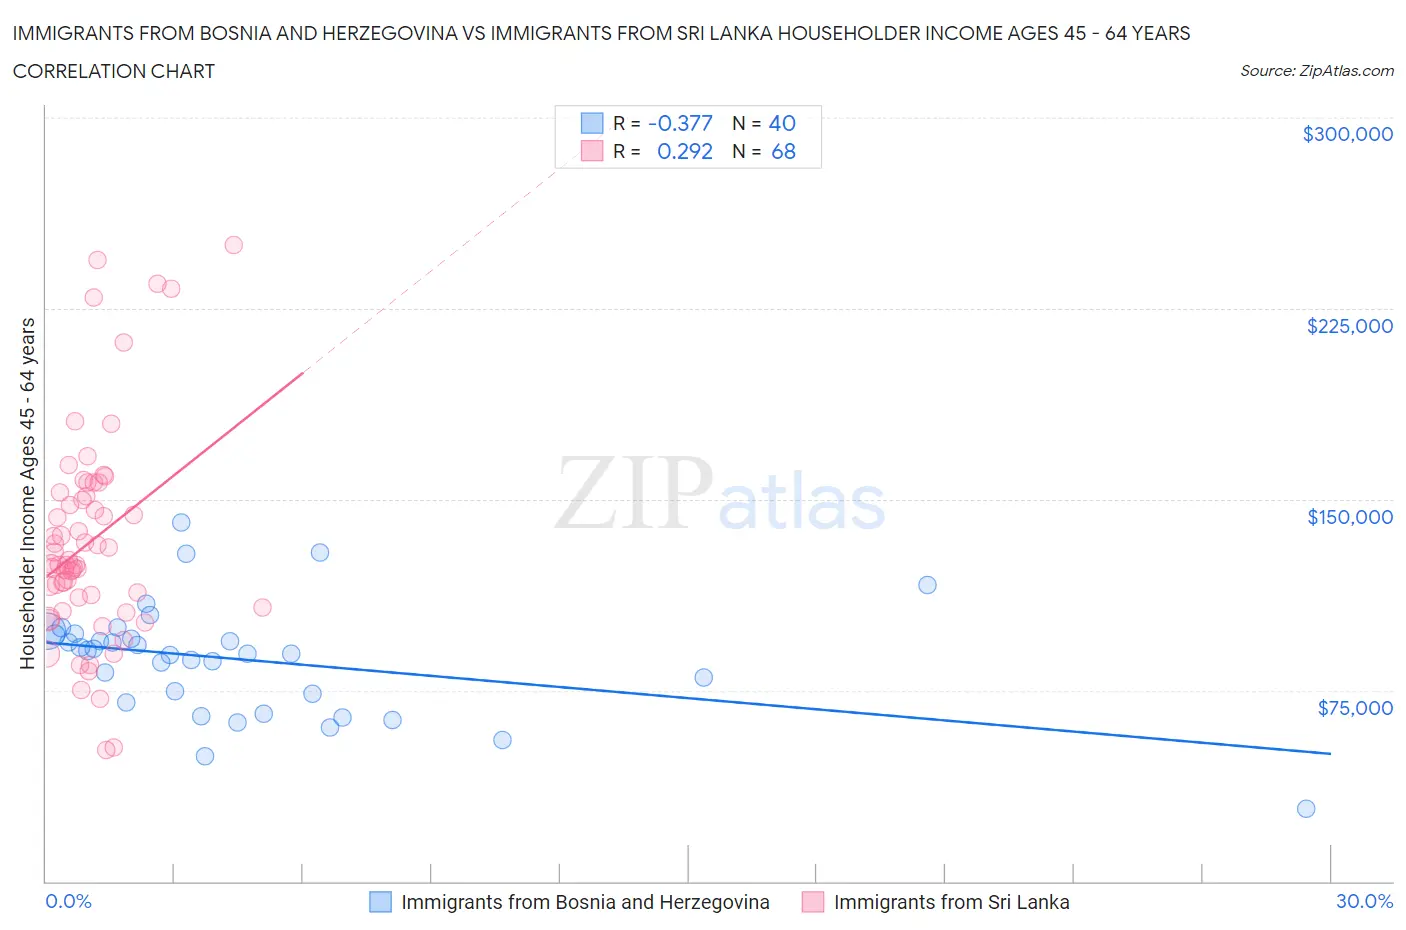 Immigrants from Bosnia and Herzegovina vs Immigrants from Sri Lanka Householder Income Ages 45 - 64 years